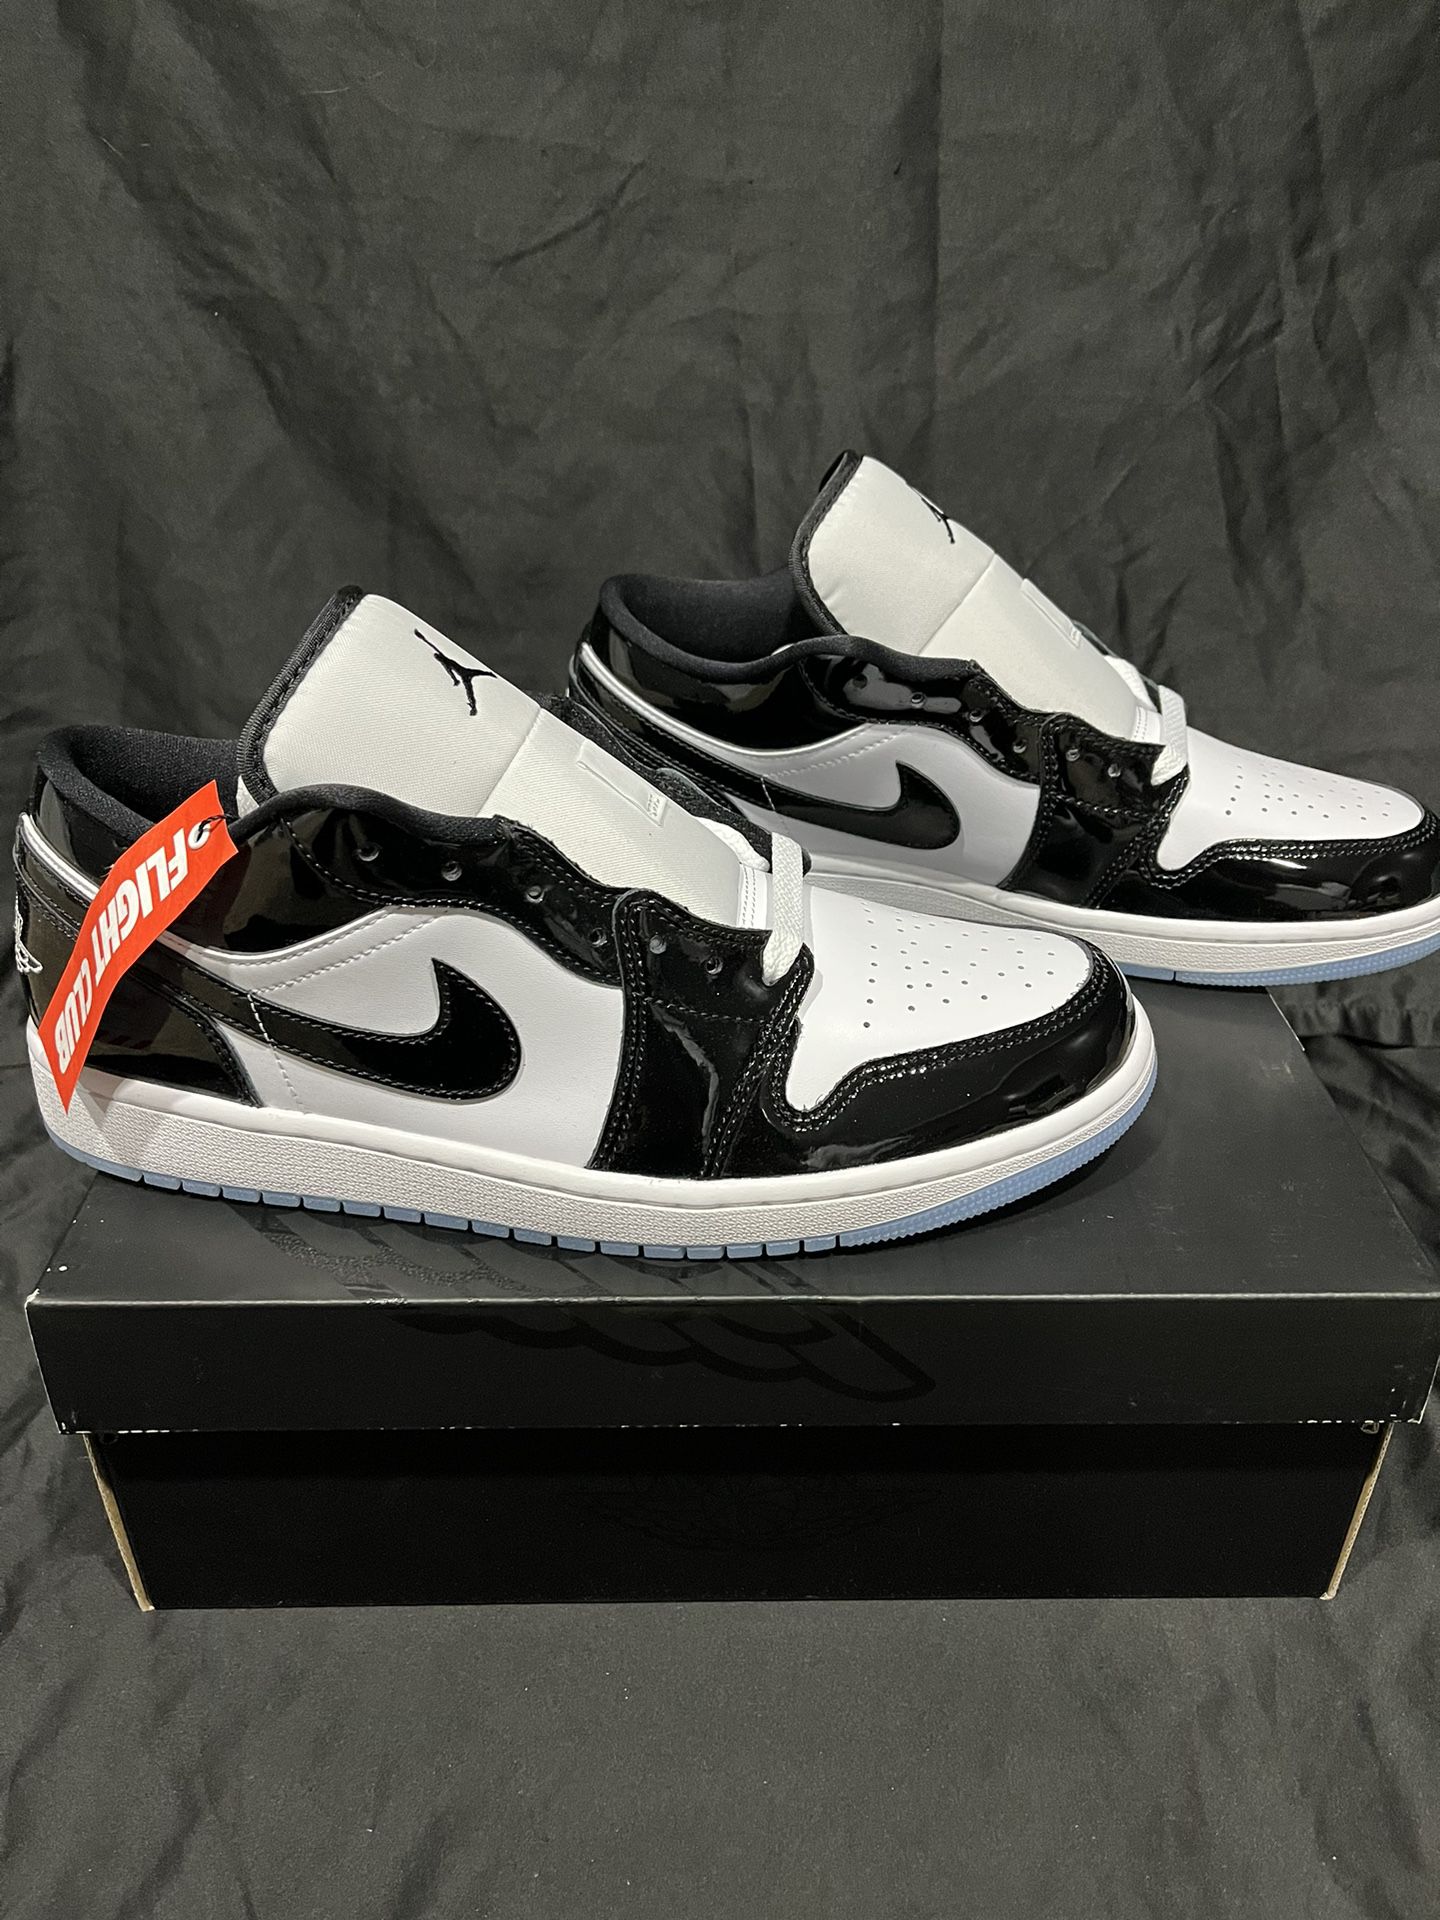 Air Jordan 1 Low Concord Black x White for Sale in Louisville, KY - OfferUp